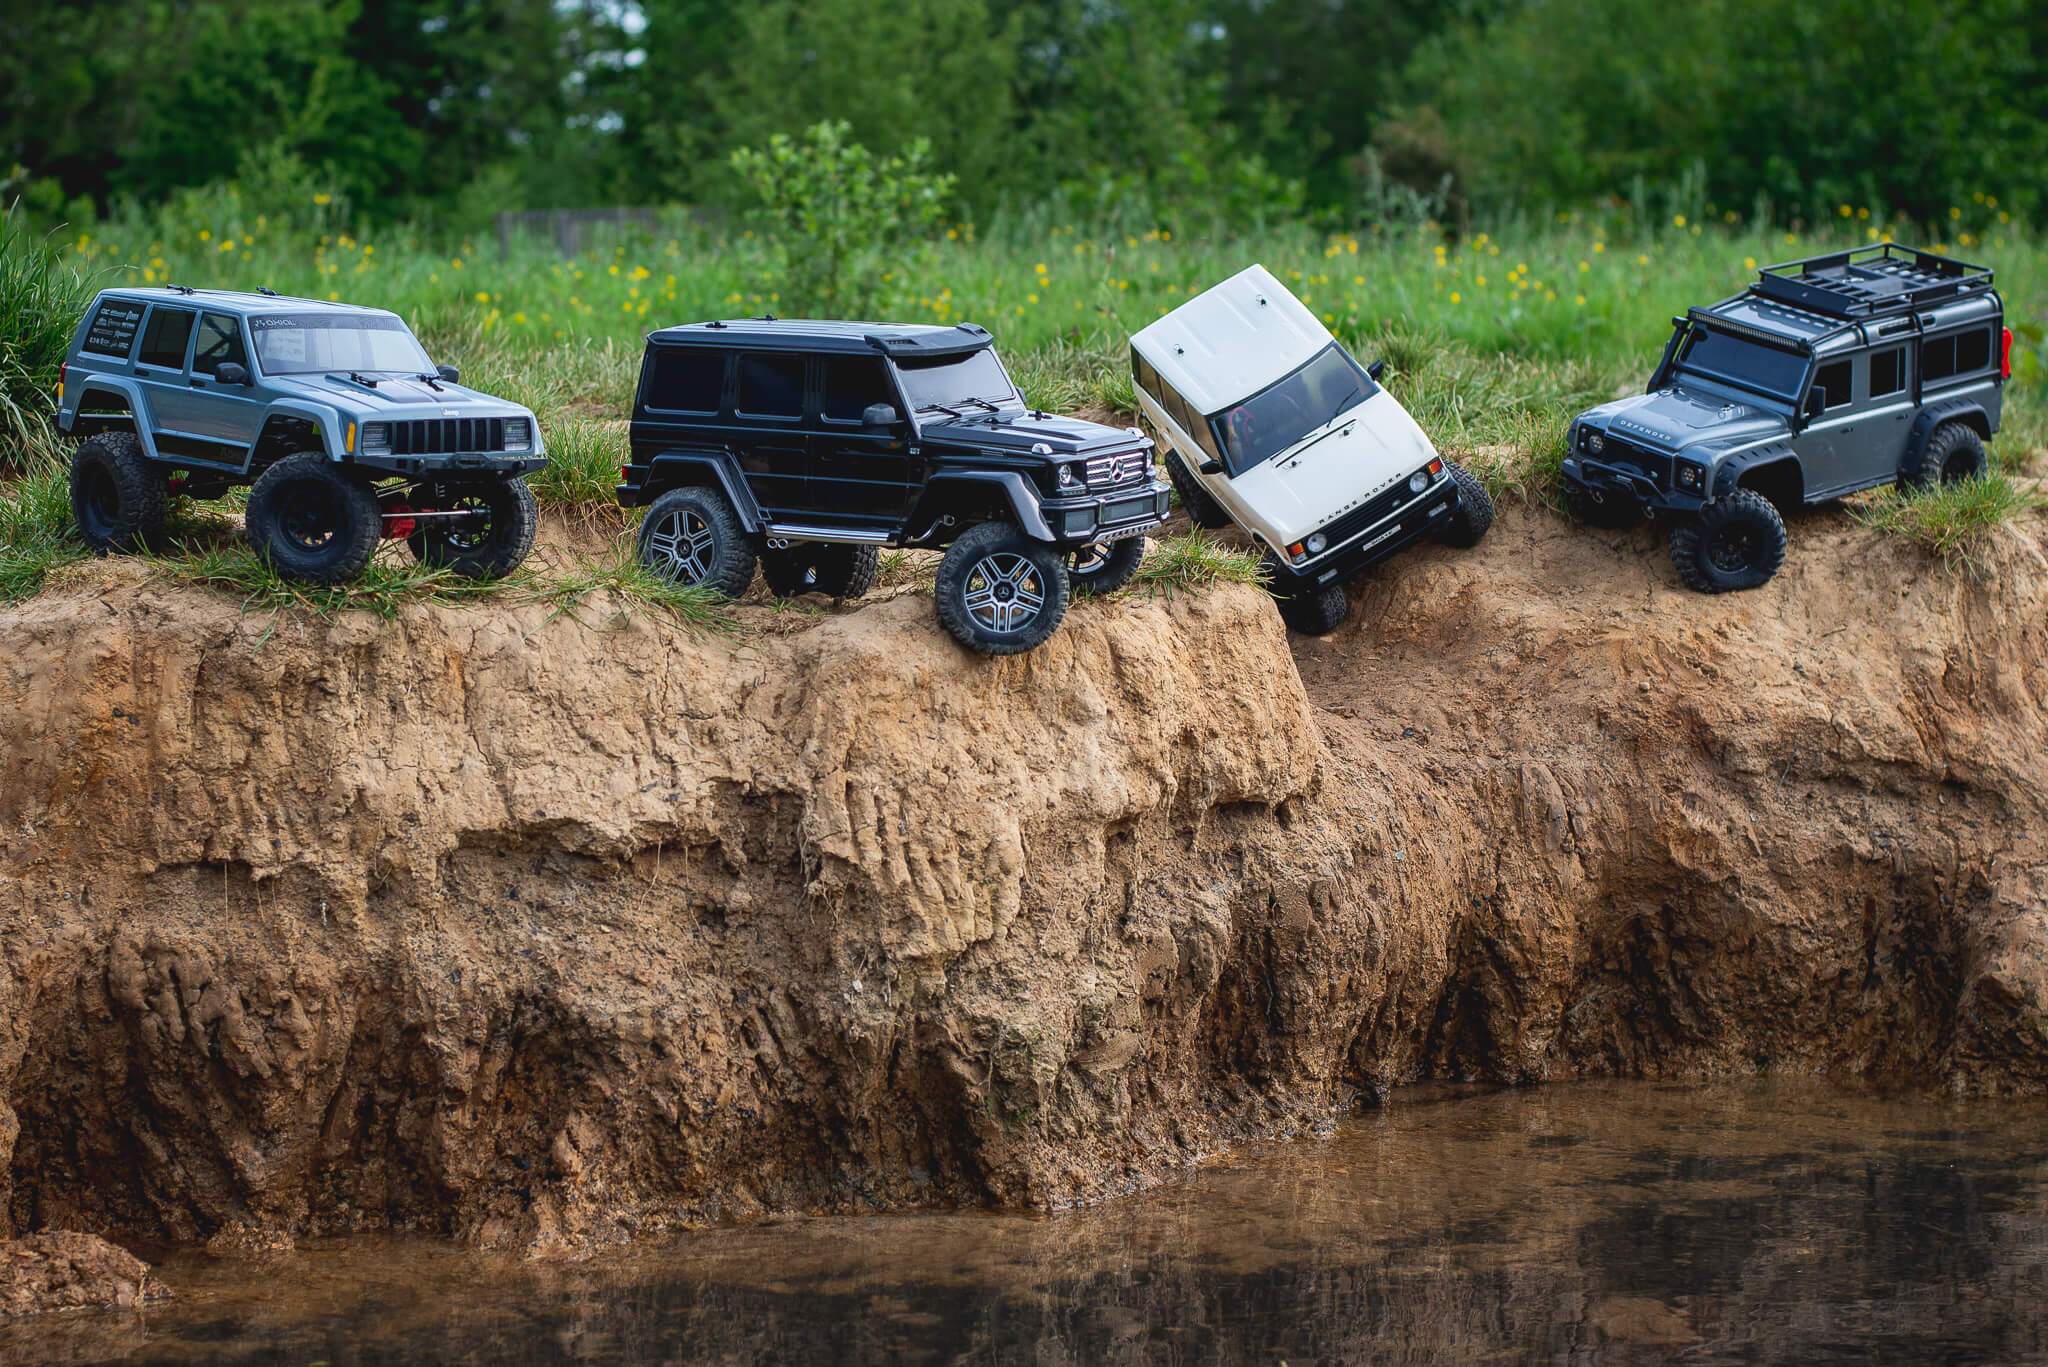 Our top 5 RC Crawlers